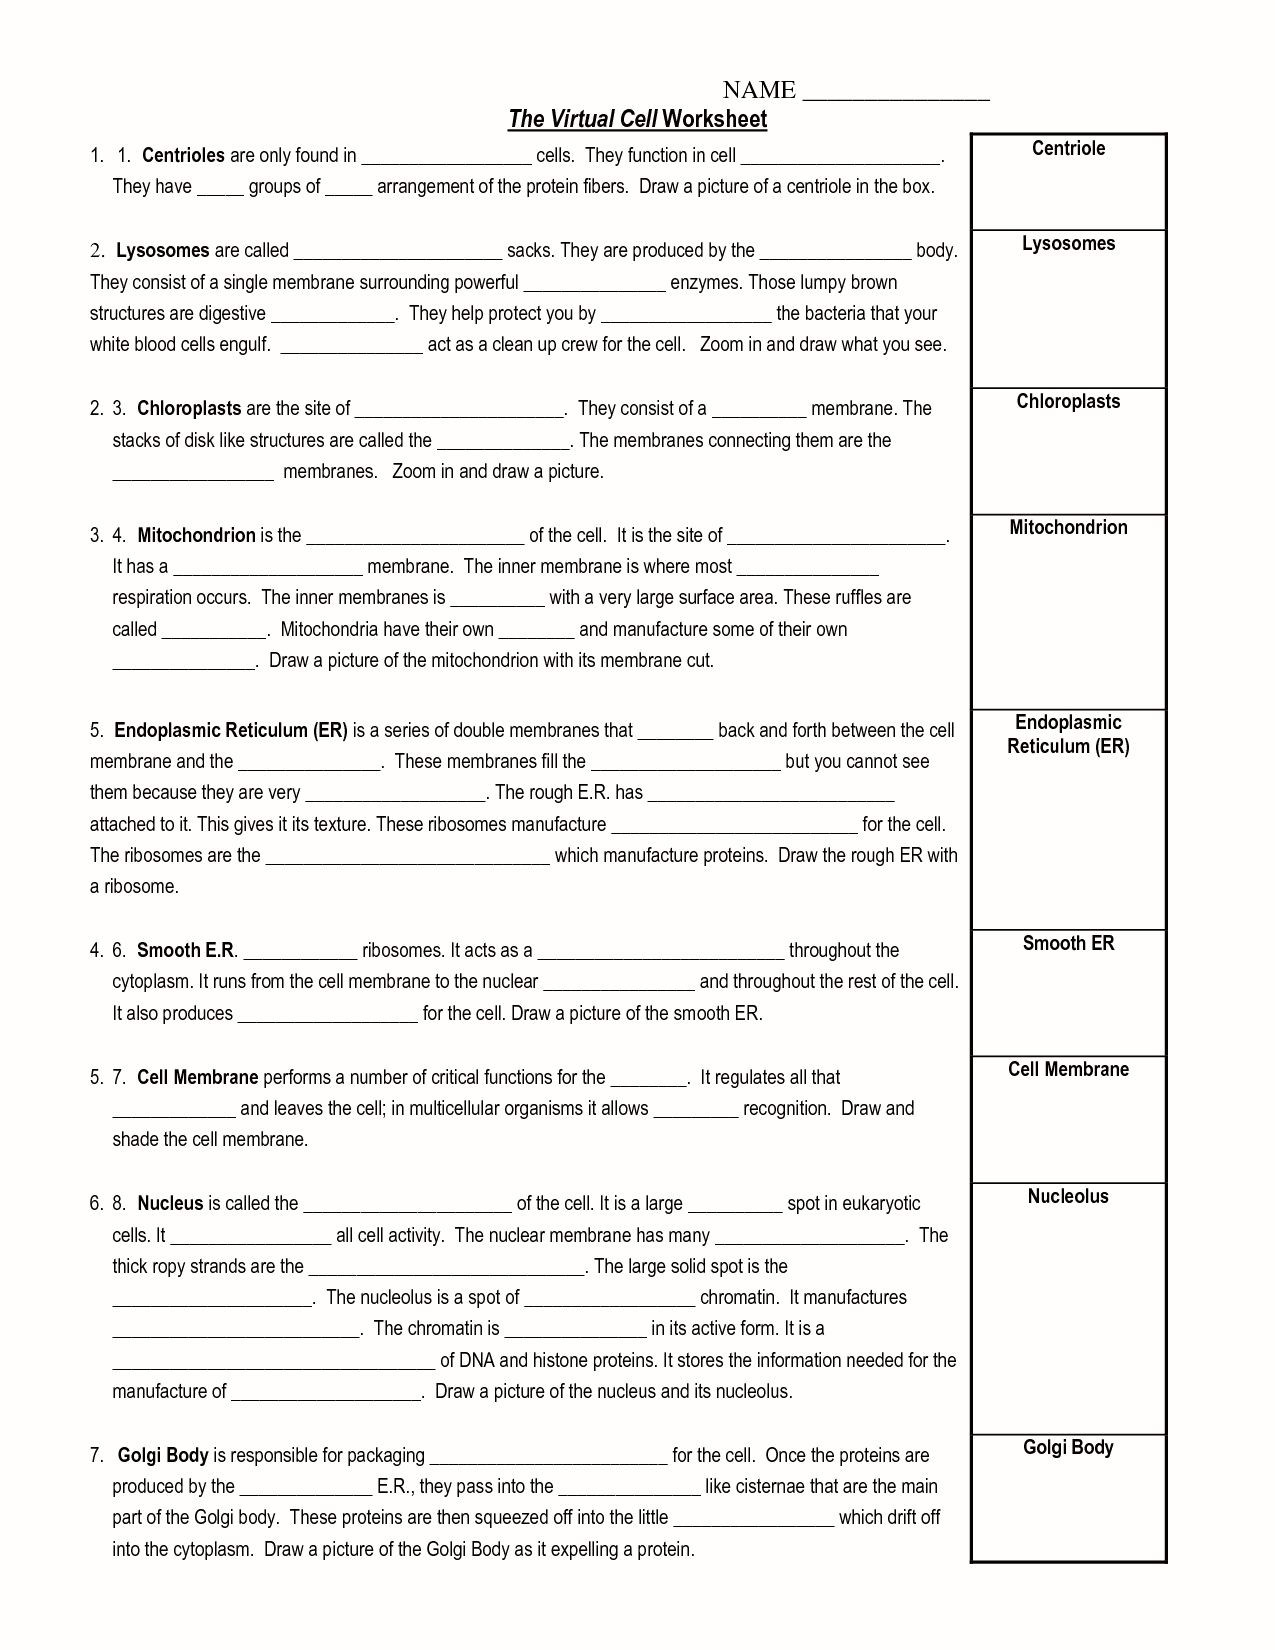 Cell organelles Worksheet Answers Cell organelles and their Functions Worksheet Answers